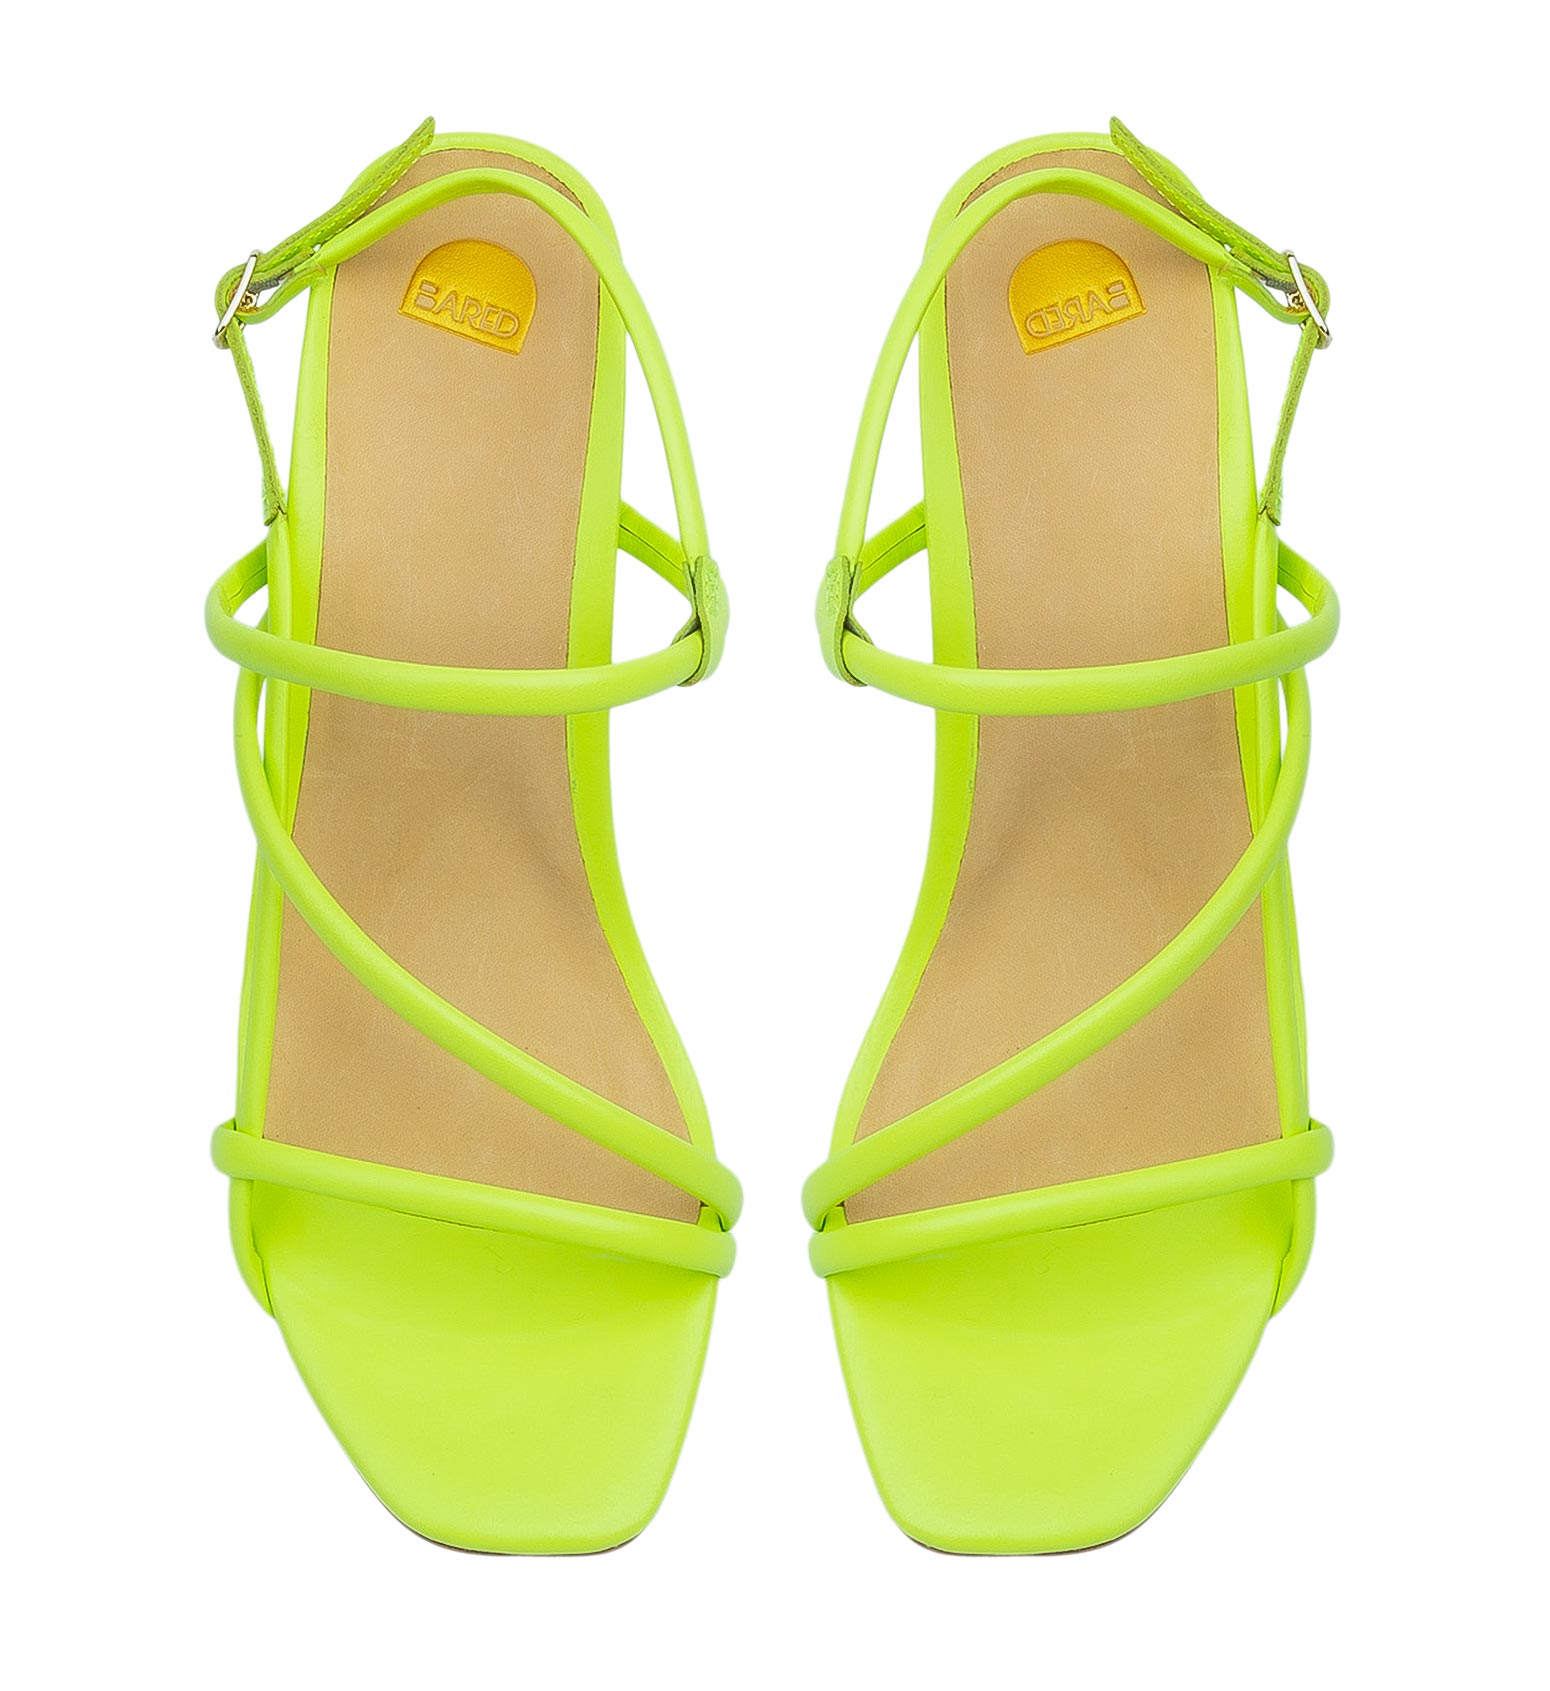 Godwit Chartreuse Leather High Heels | Bared Footwear